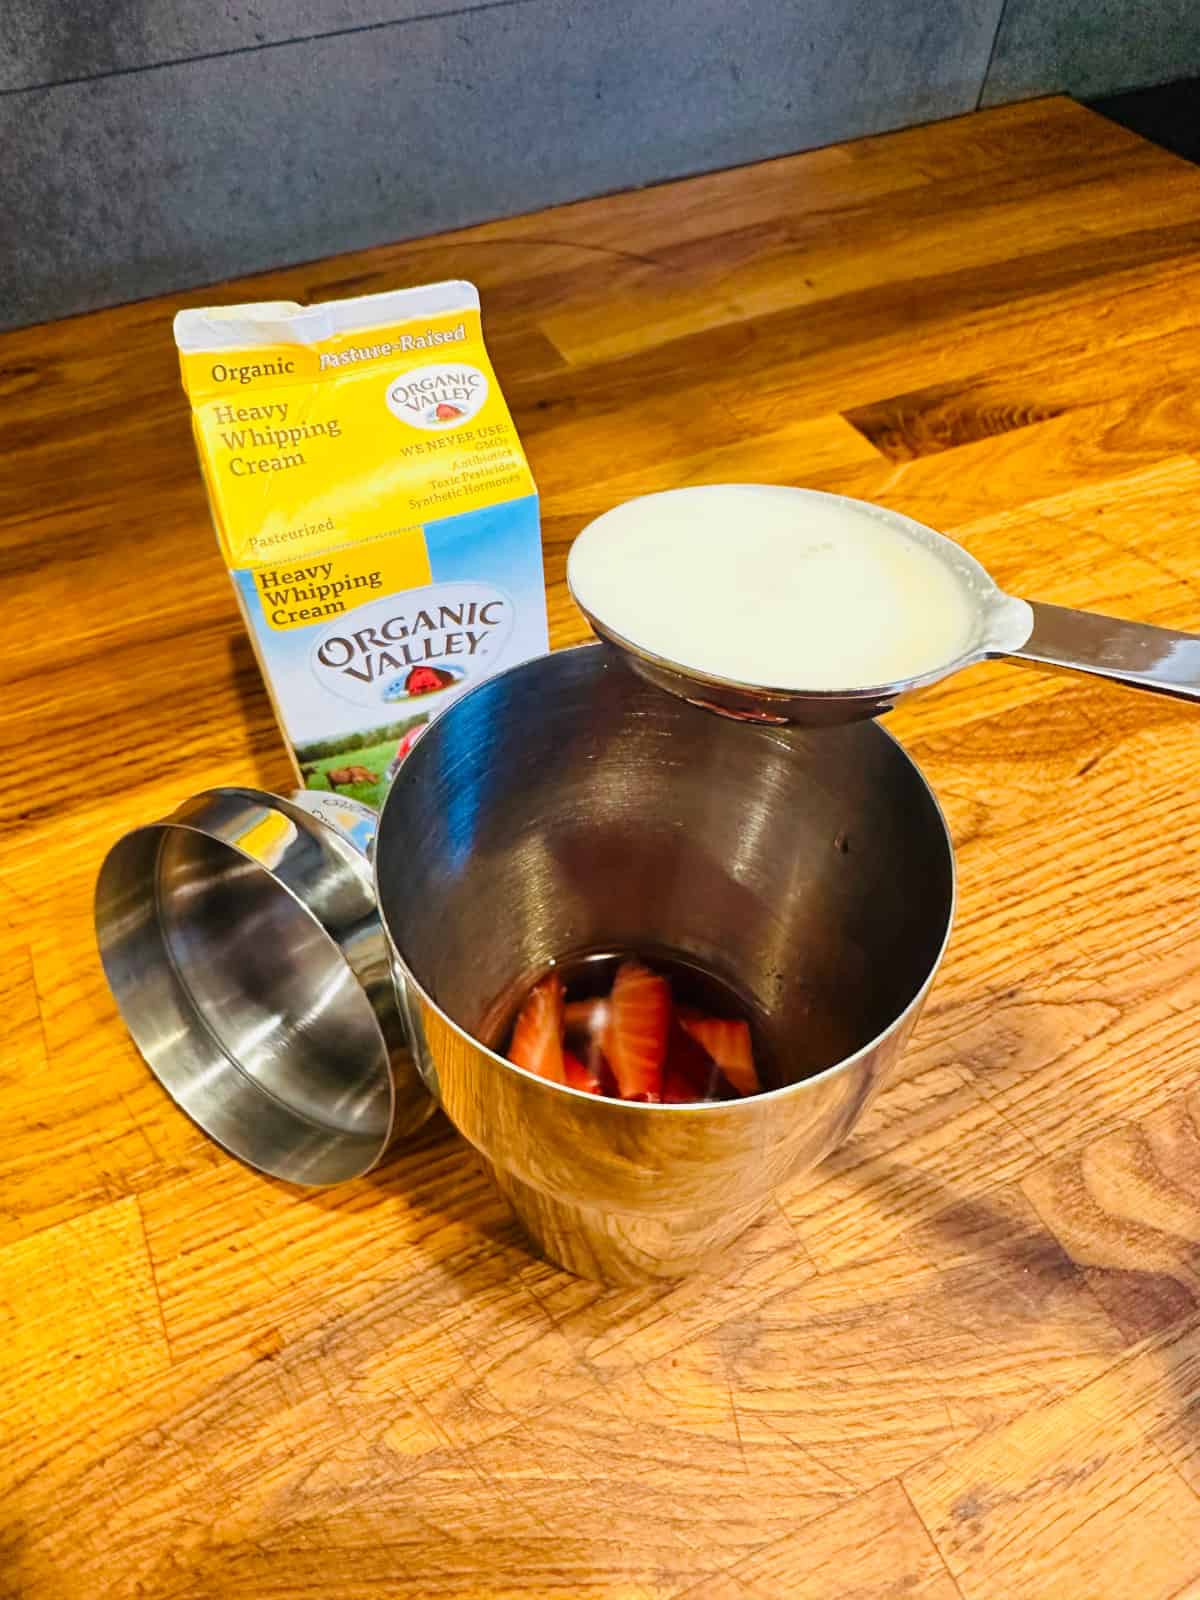 A teaspoon of cream being held over a cocktail shaker next to a carton of heavy whipping cream.